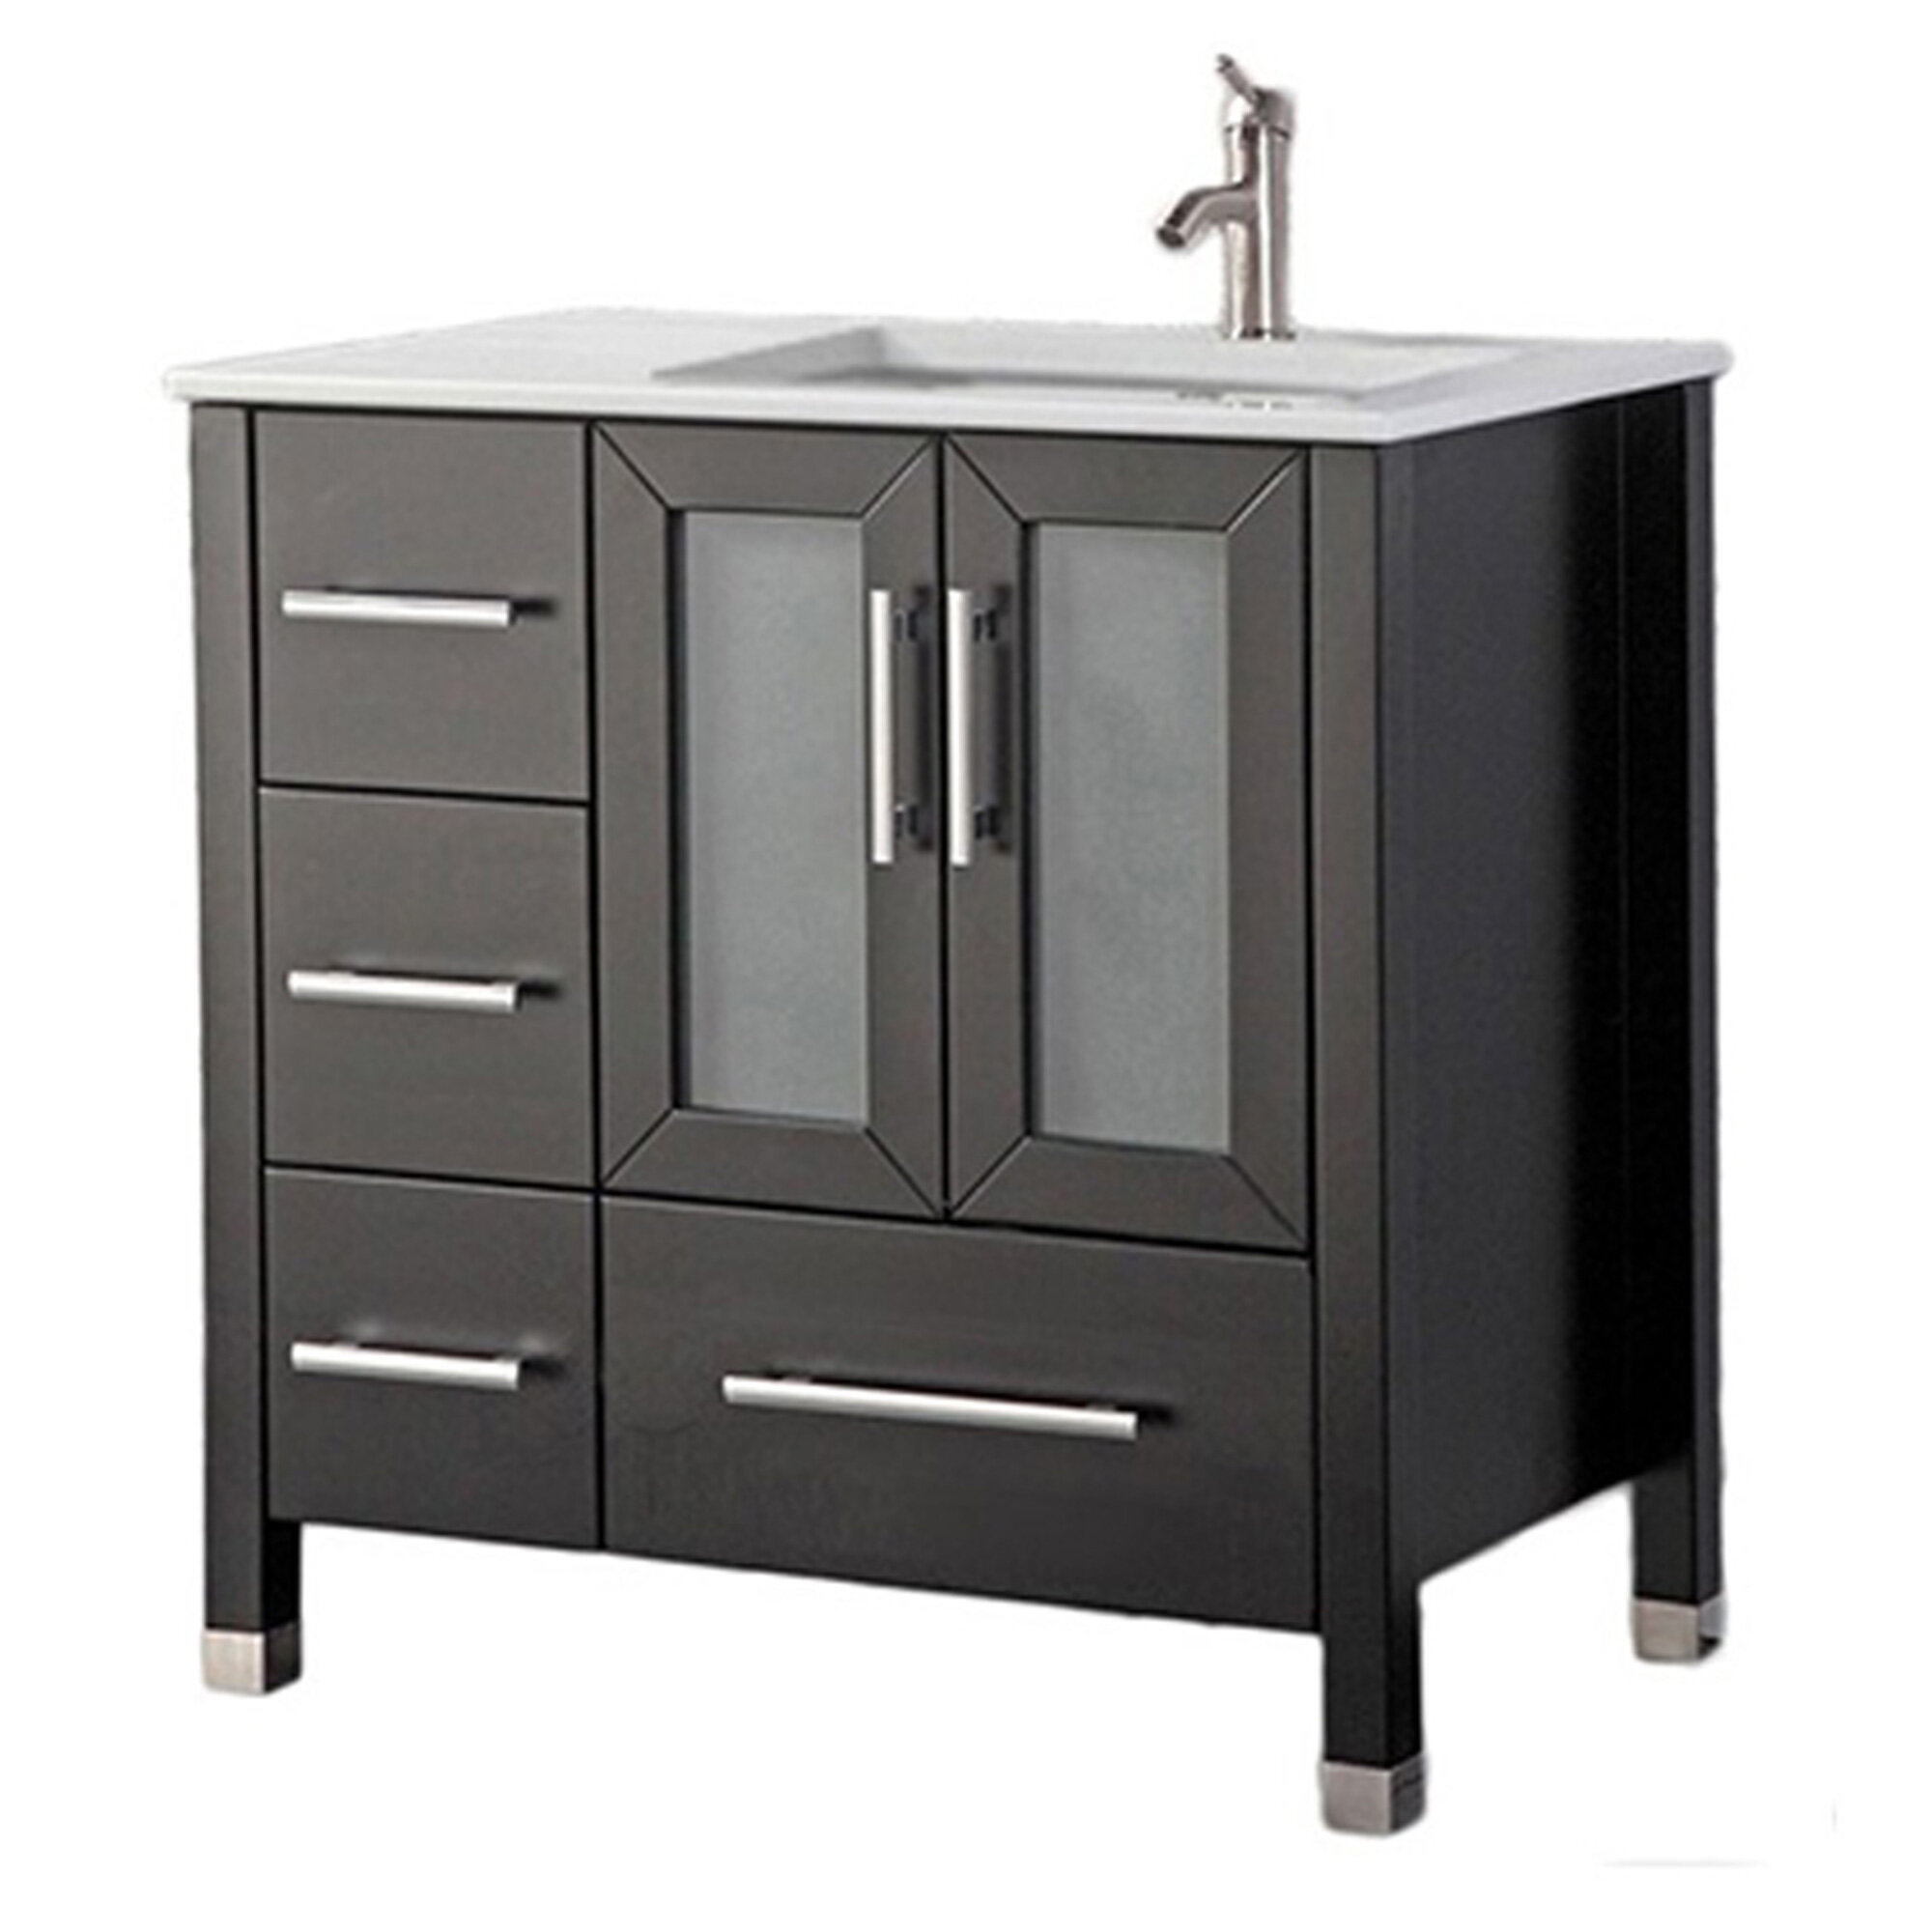 Right Offset Bathroom Vanity Visualhunt, 36 Vanity With Sink On Right Side